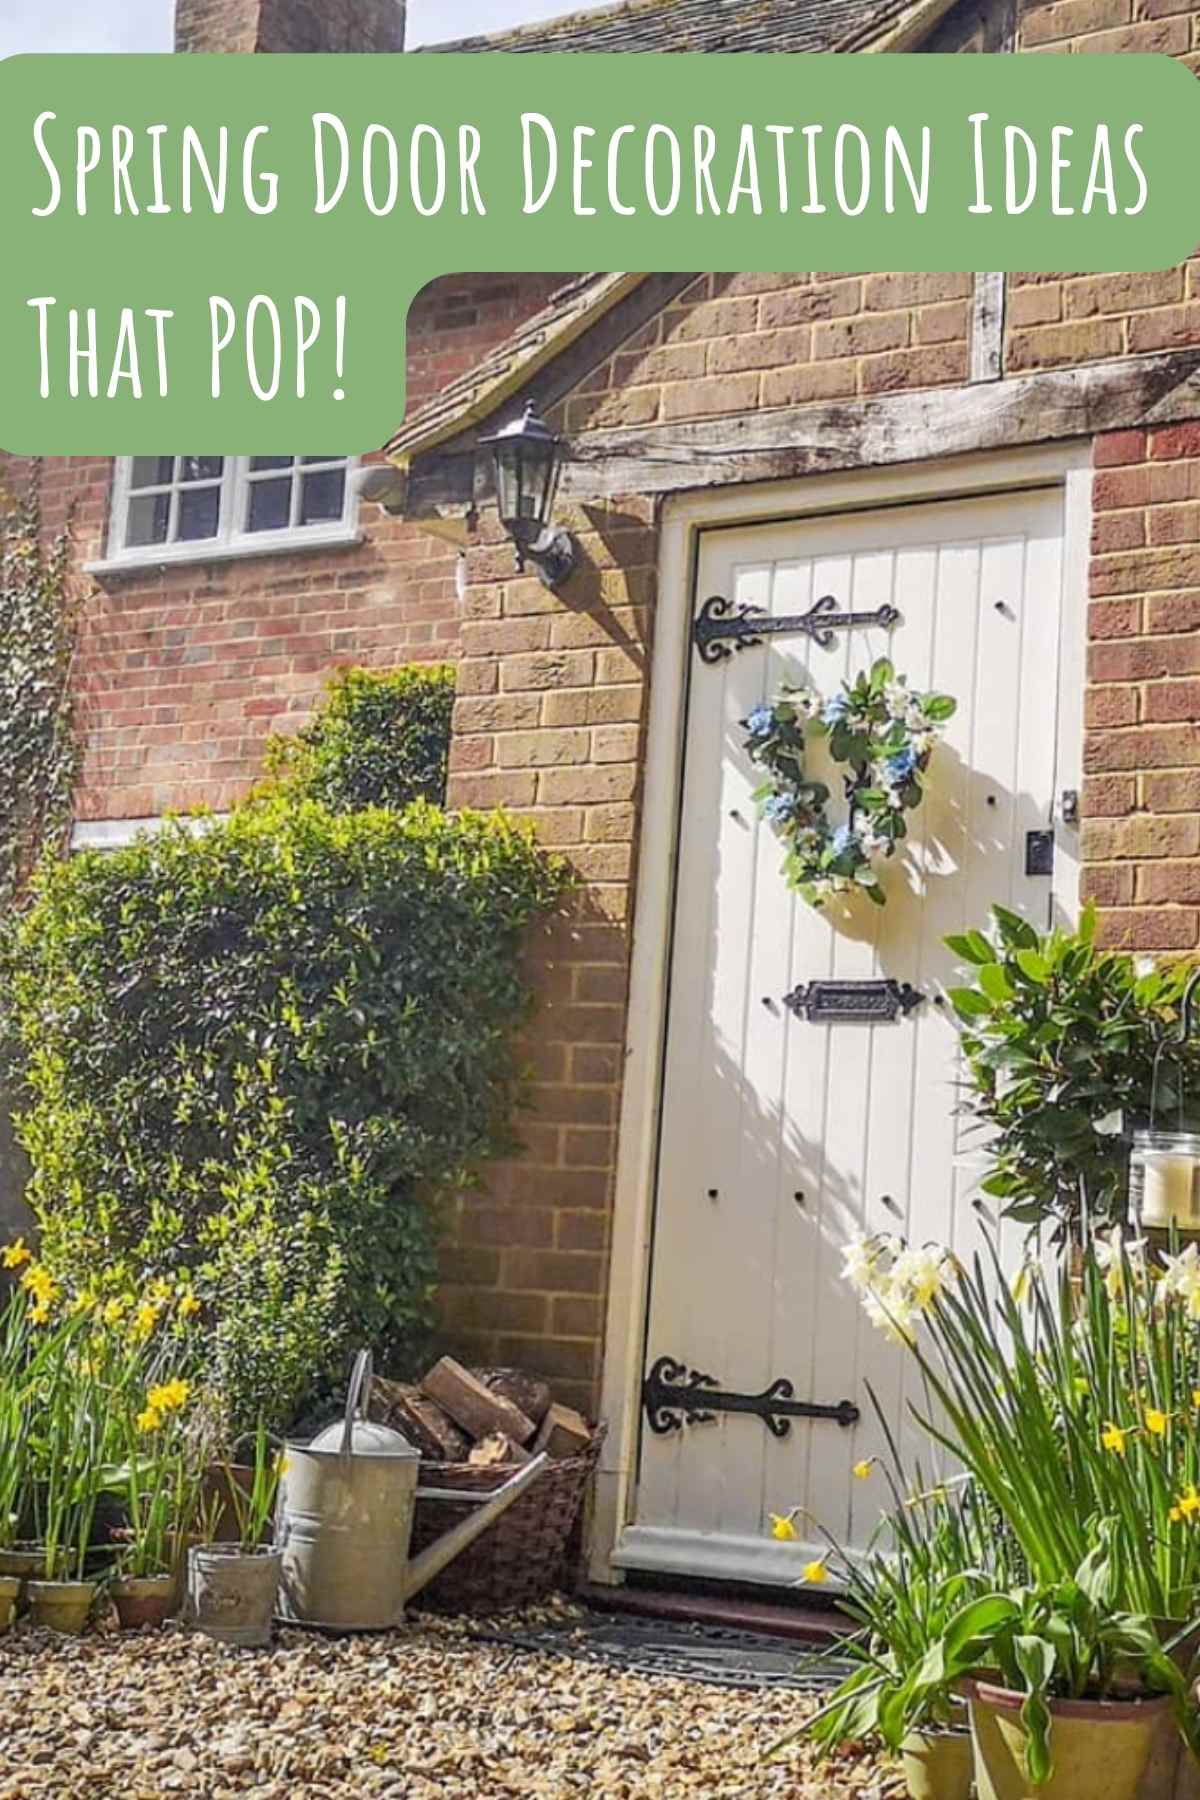 Spring door decorations ideas that pop! Cute cottage with spring wreath.